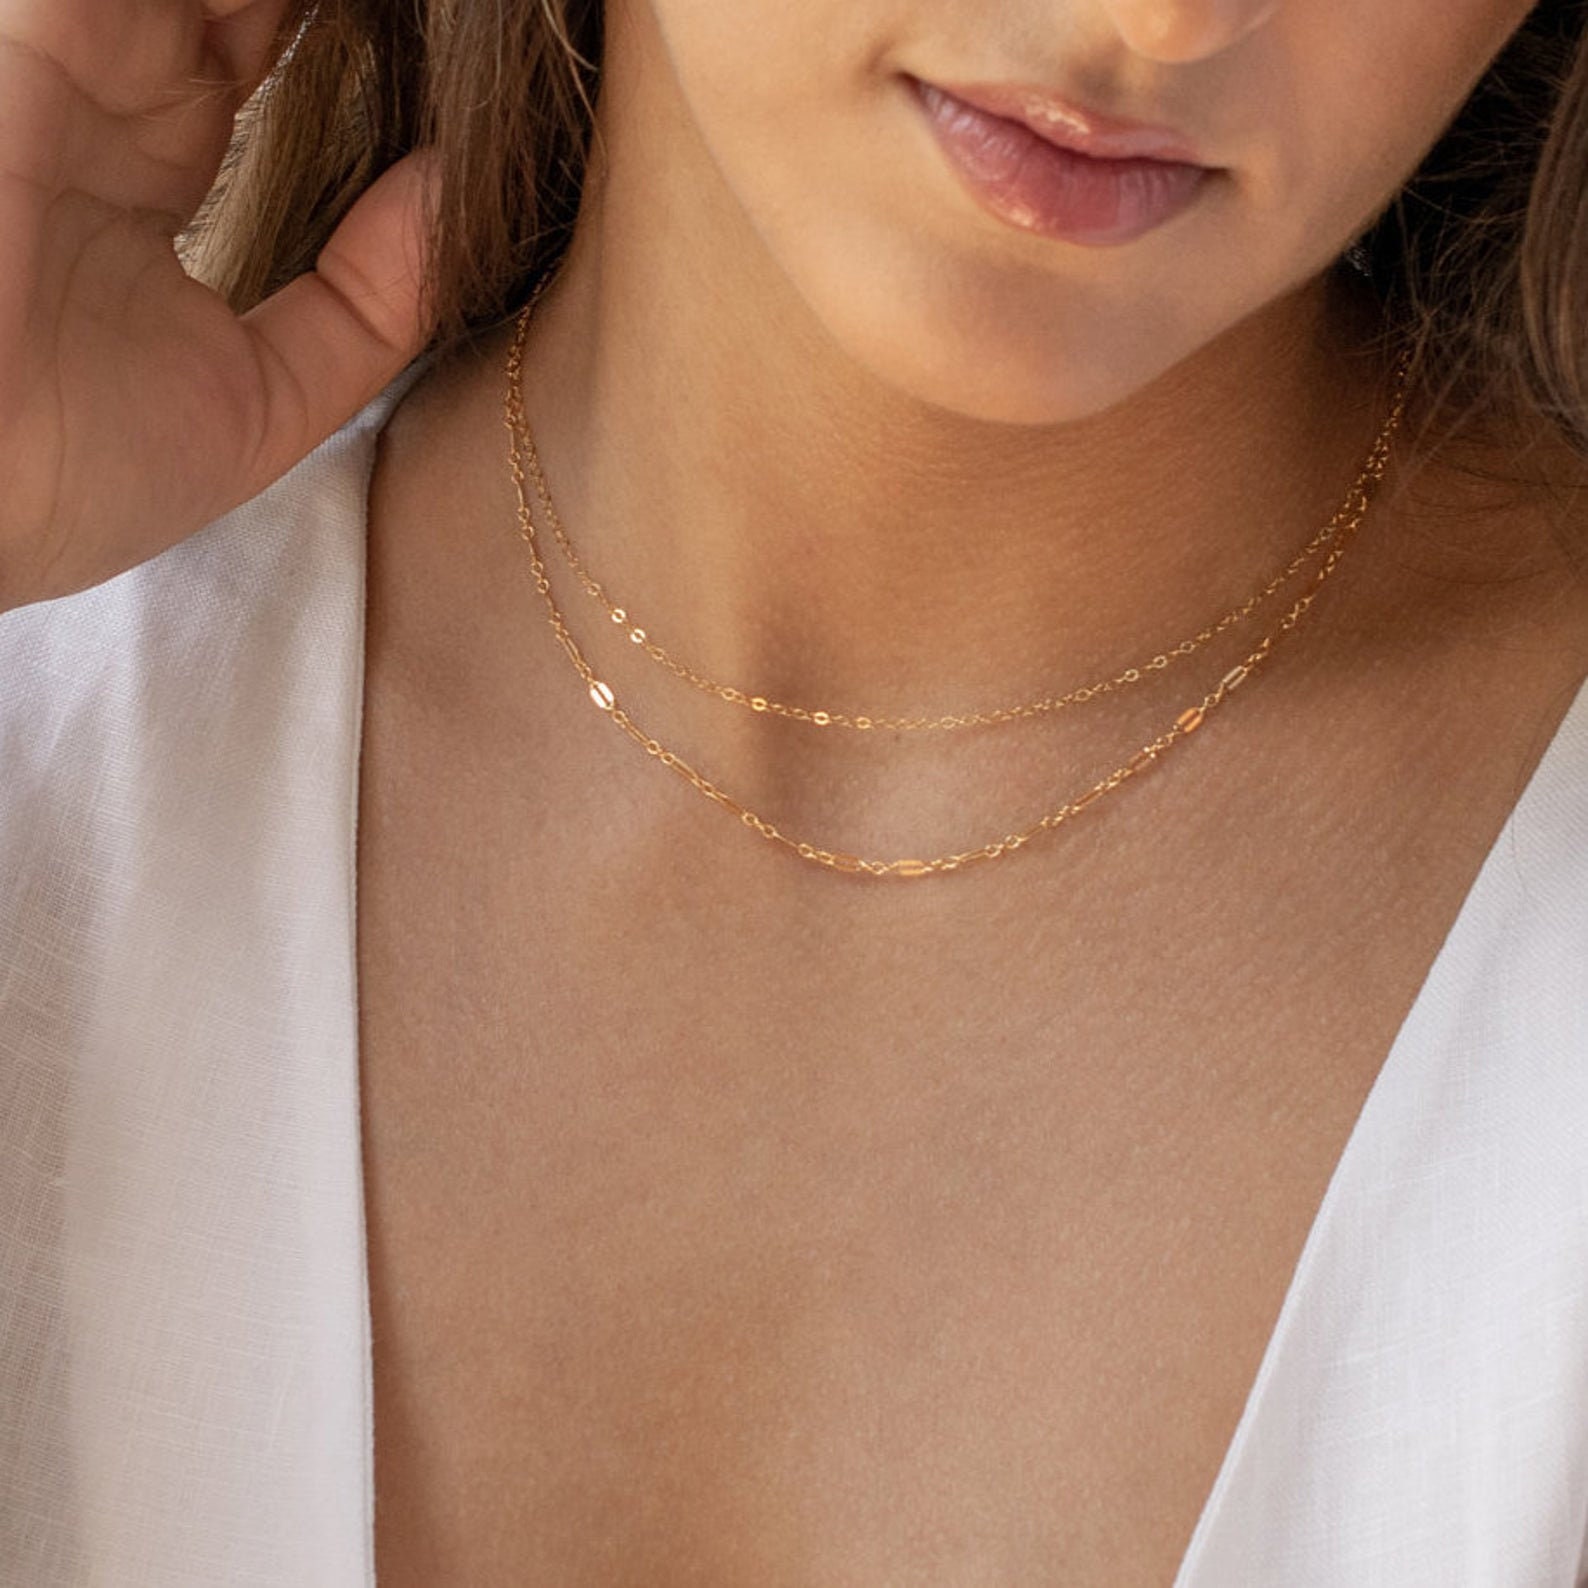 Layered Necklace Set Necklaces for Women Gold Chain Necklace Minimalist  Necklace Dainty Gold Necklace Minimalist Jewelry 